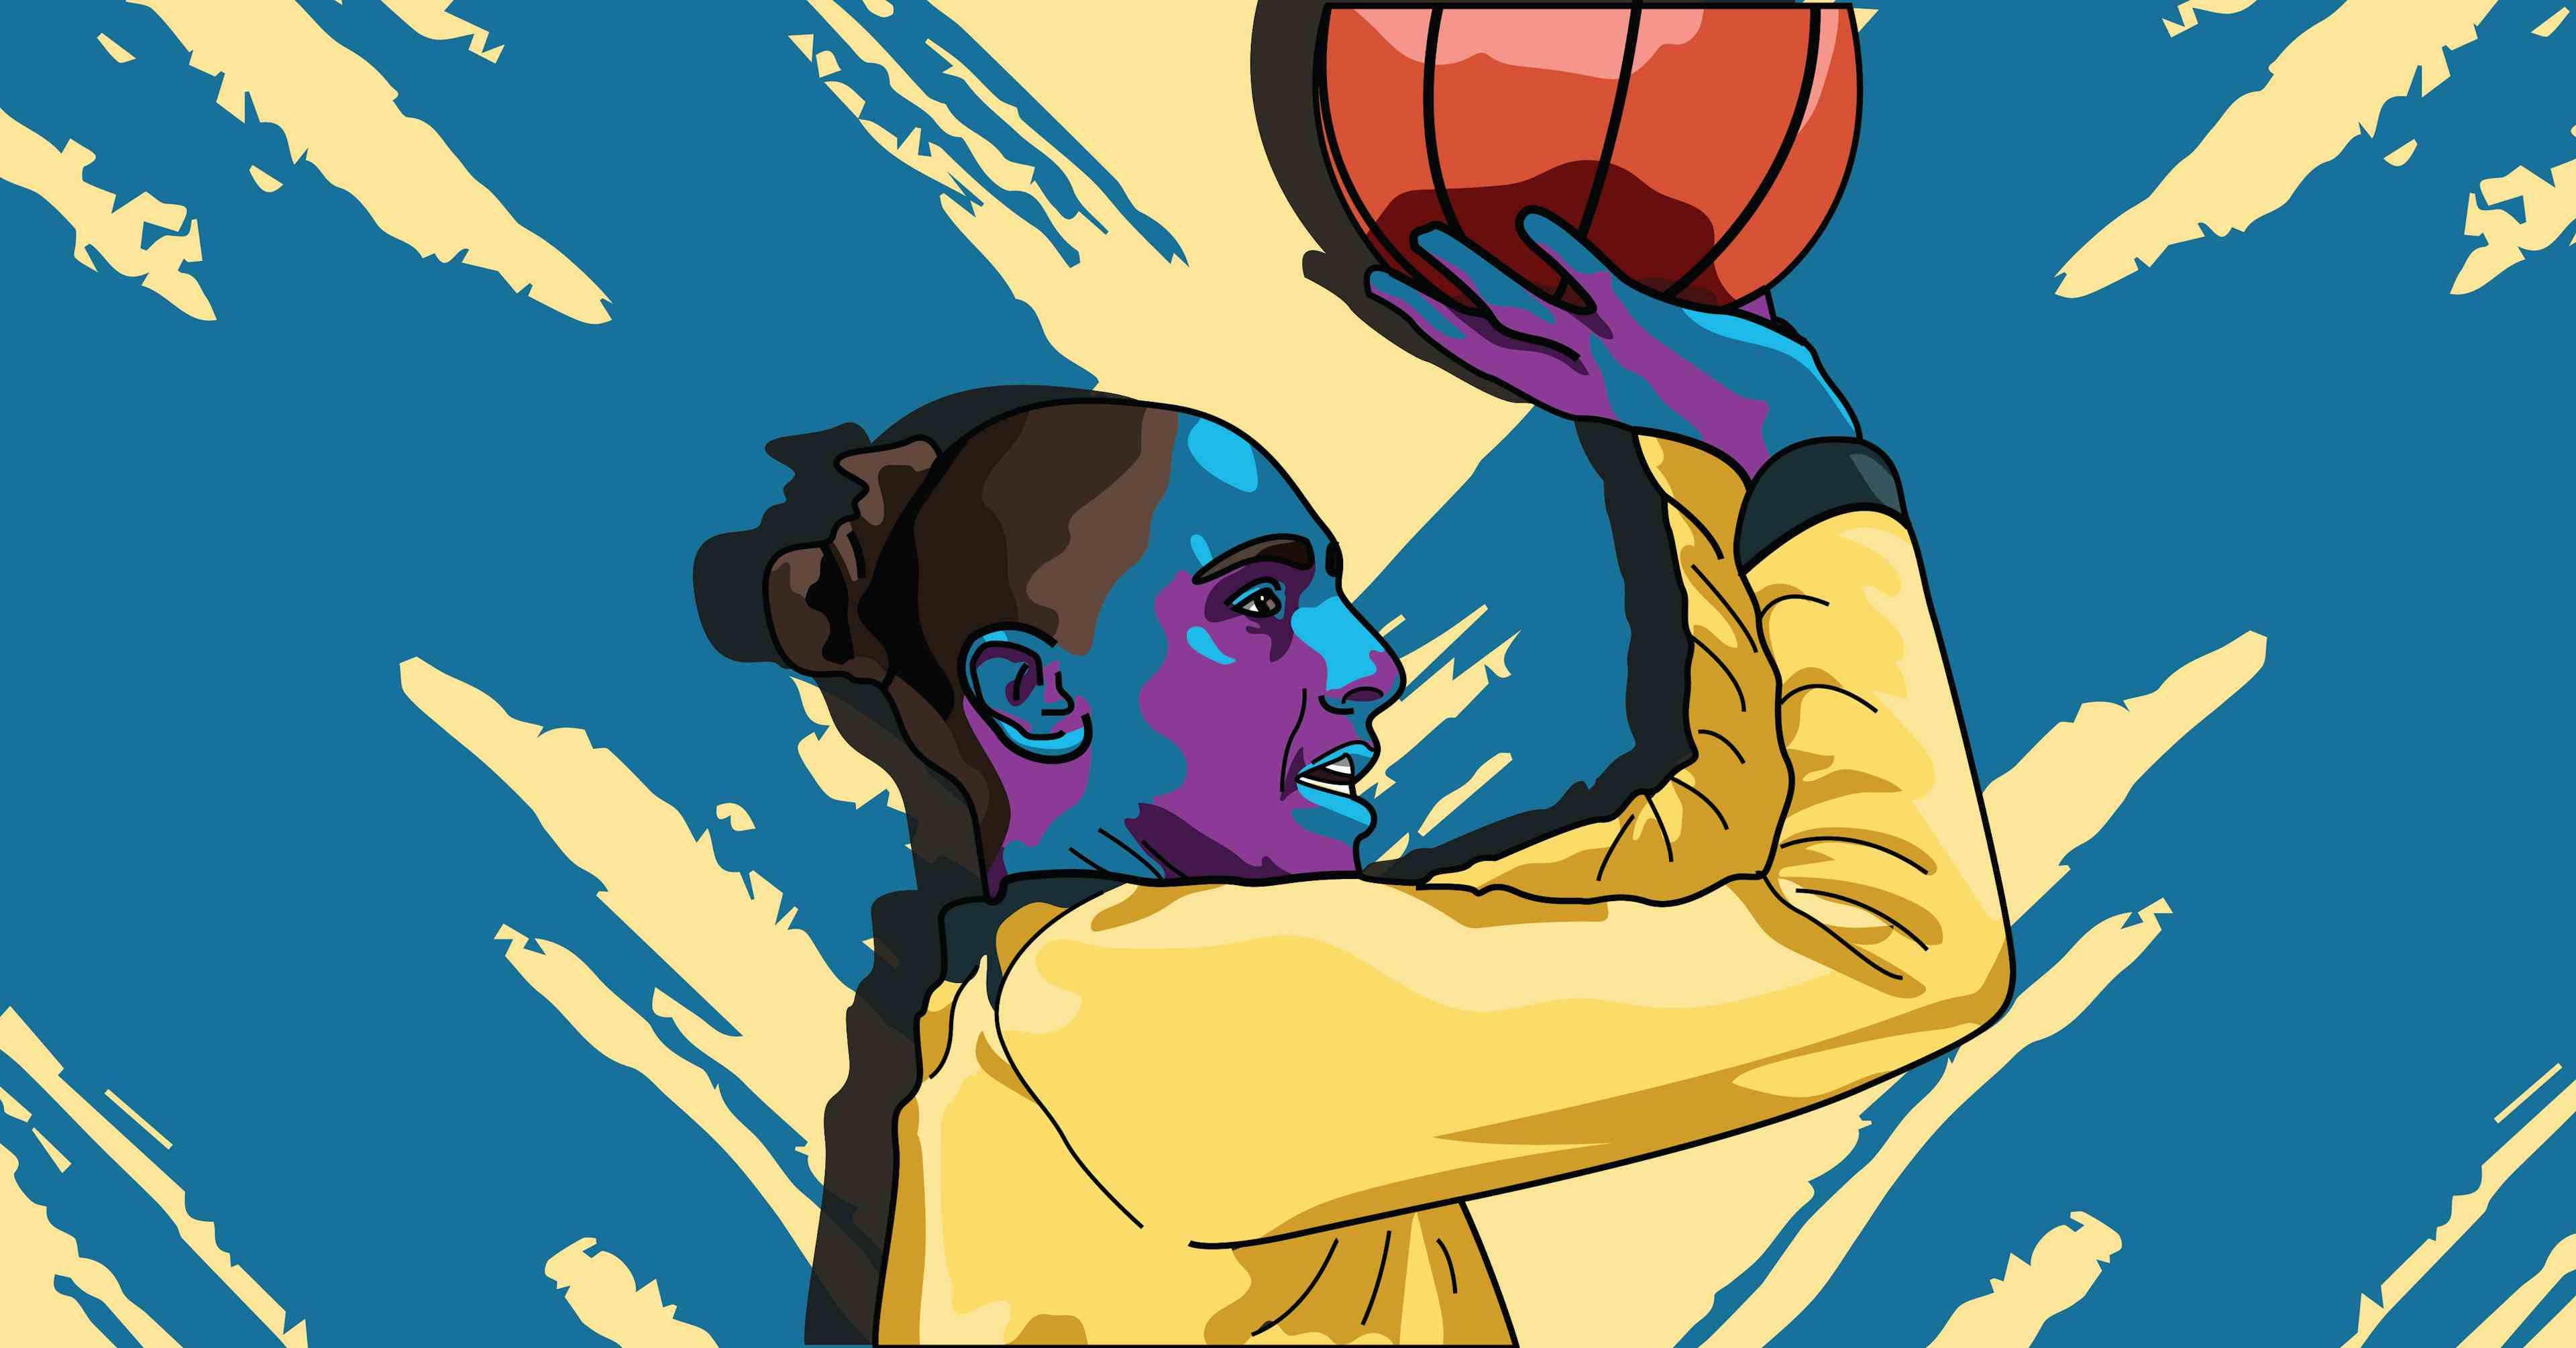 2022 WNBA Draft preview: The Las Vegas Aces present the best opportunity  for new draftees - Swish Appeal